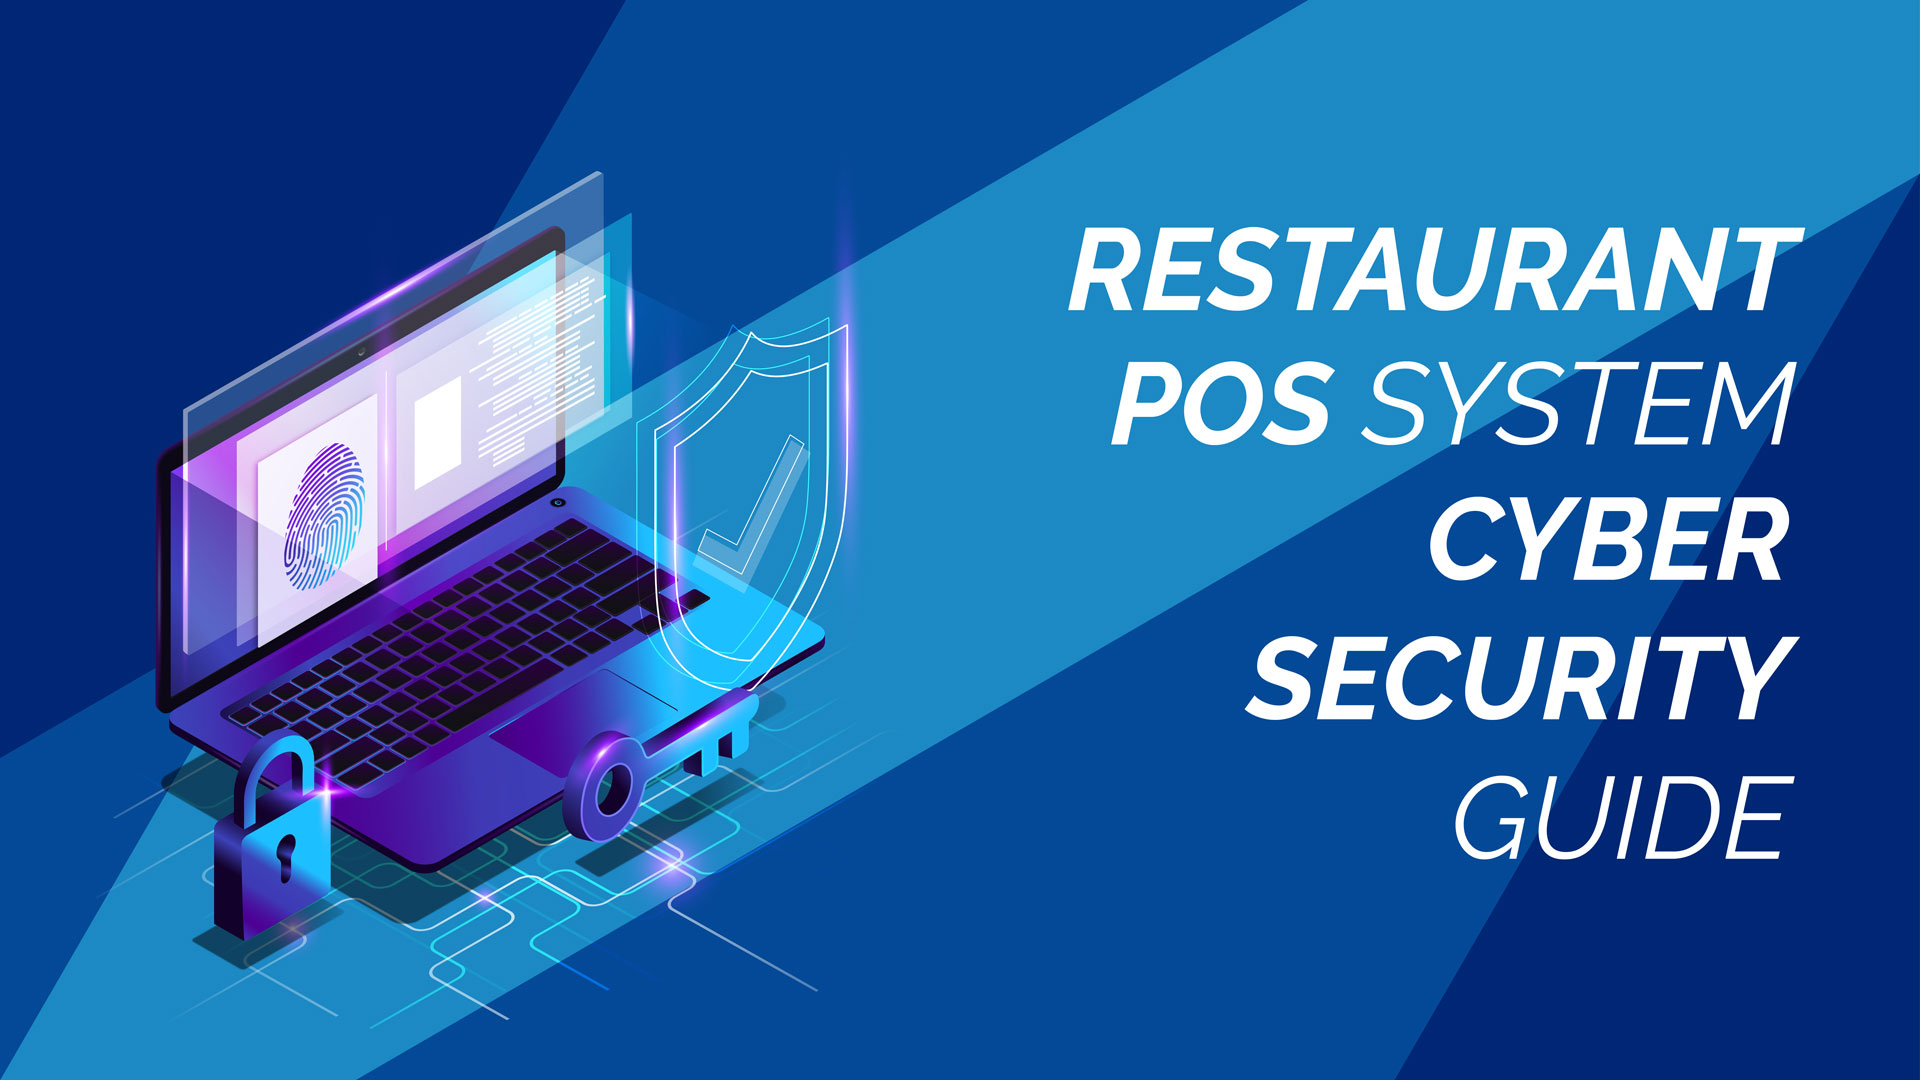 Restaurant POS System Cyber Security Guide 